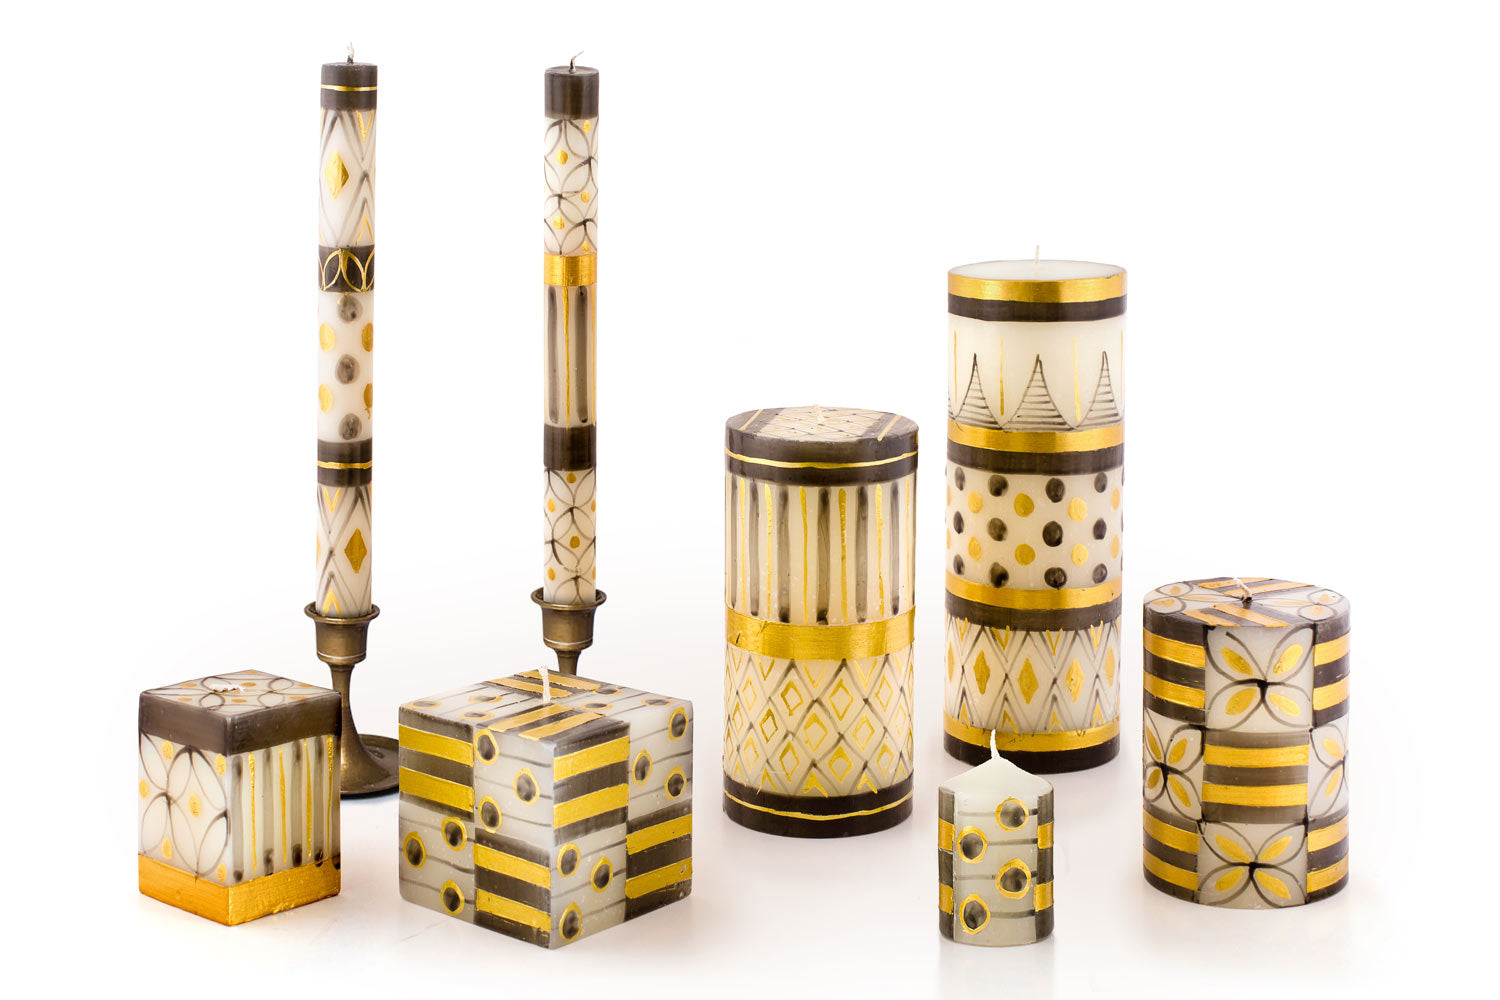 Celebration Handpainted Candle Collection. White background with gold and dark grey designs. Wonderfully festive, and perfect for any celebration!